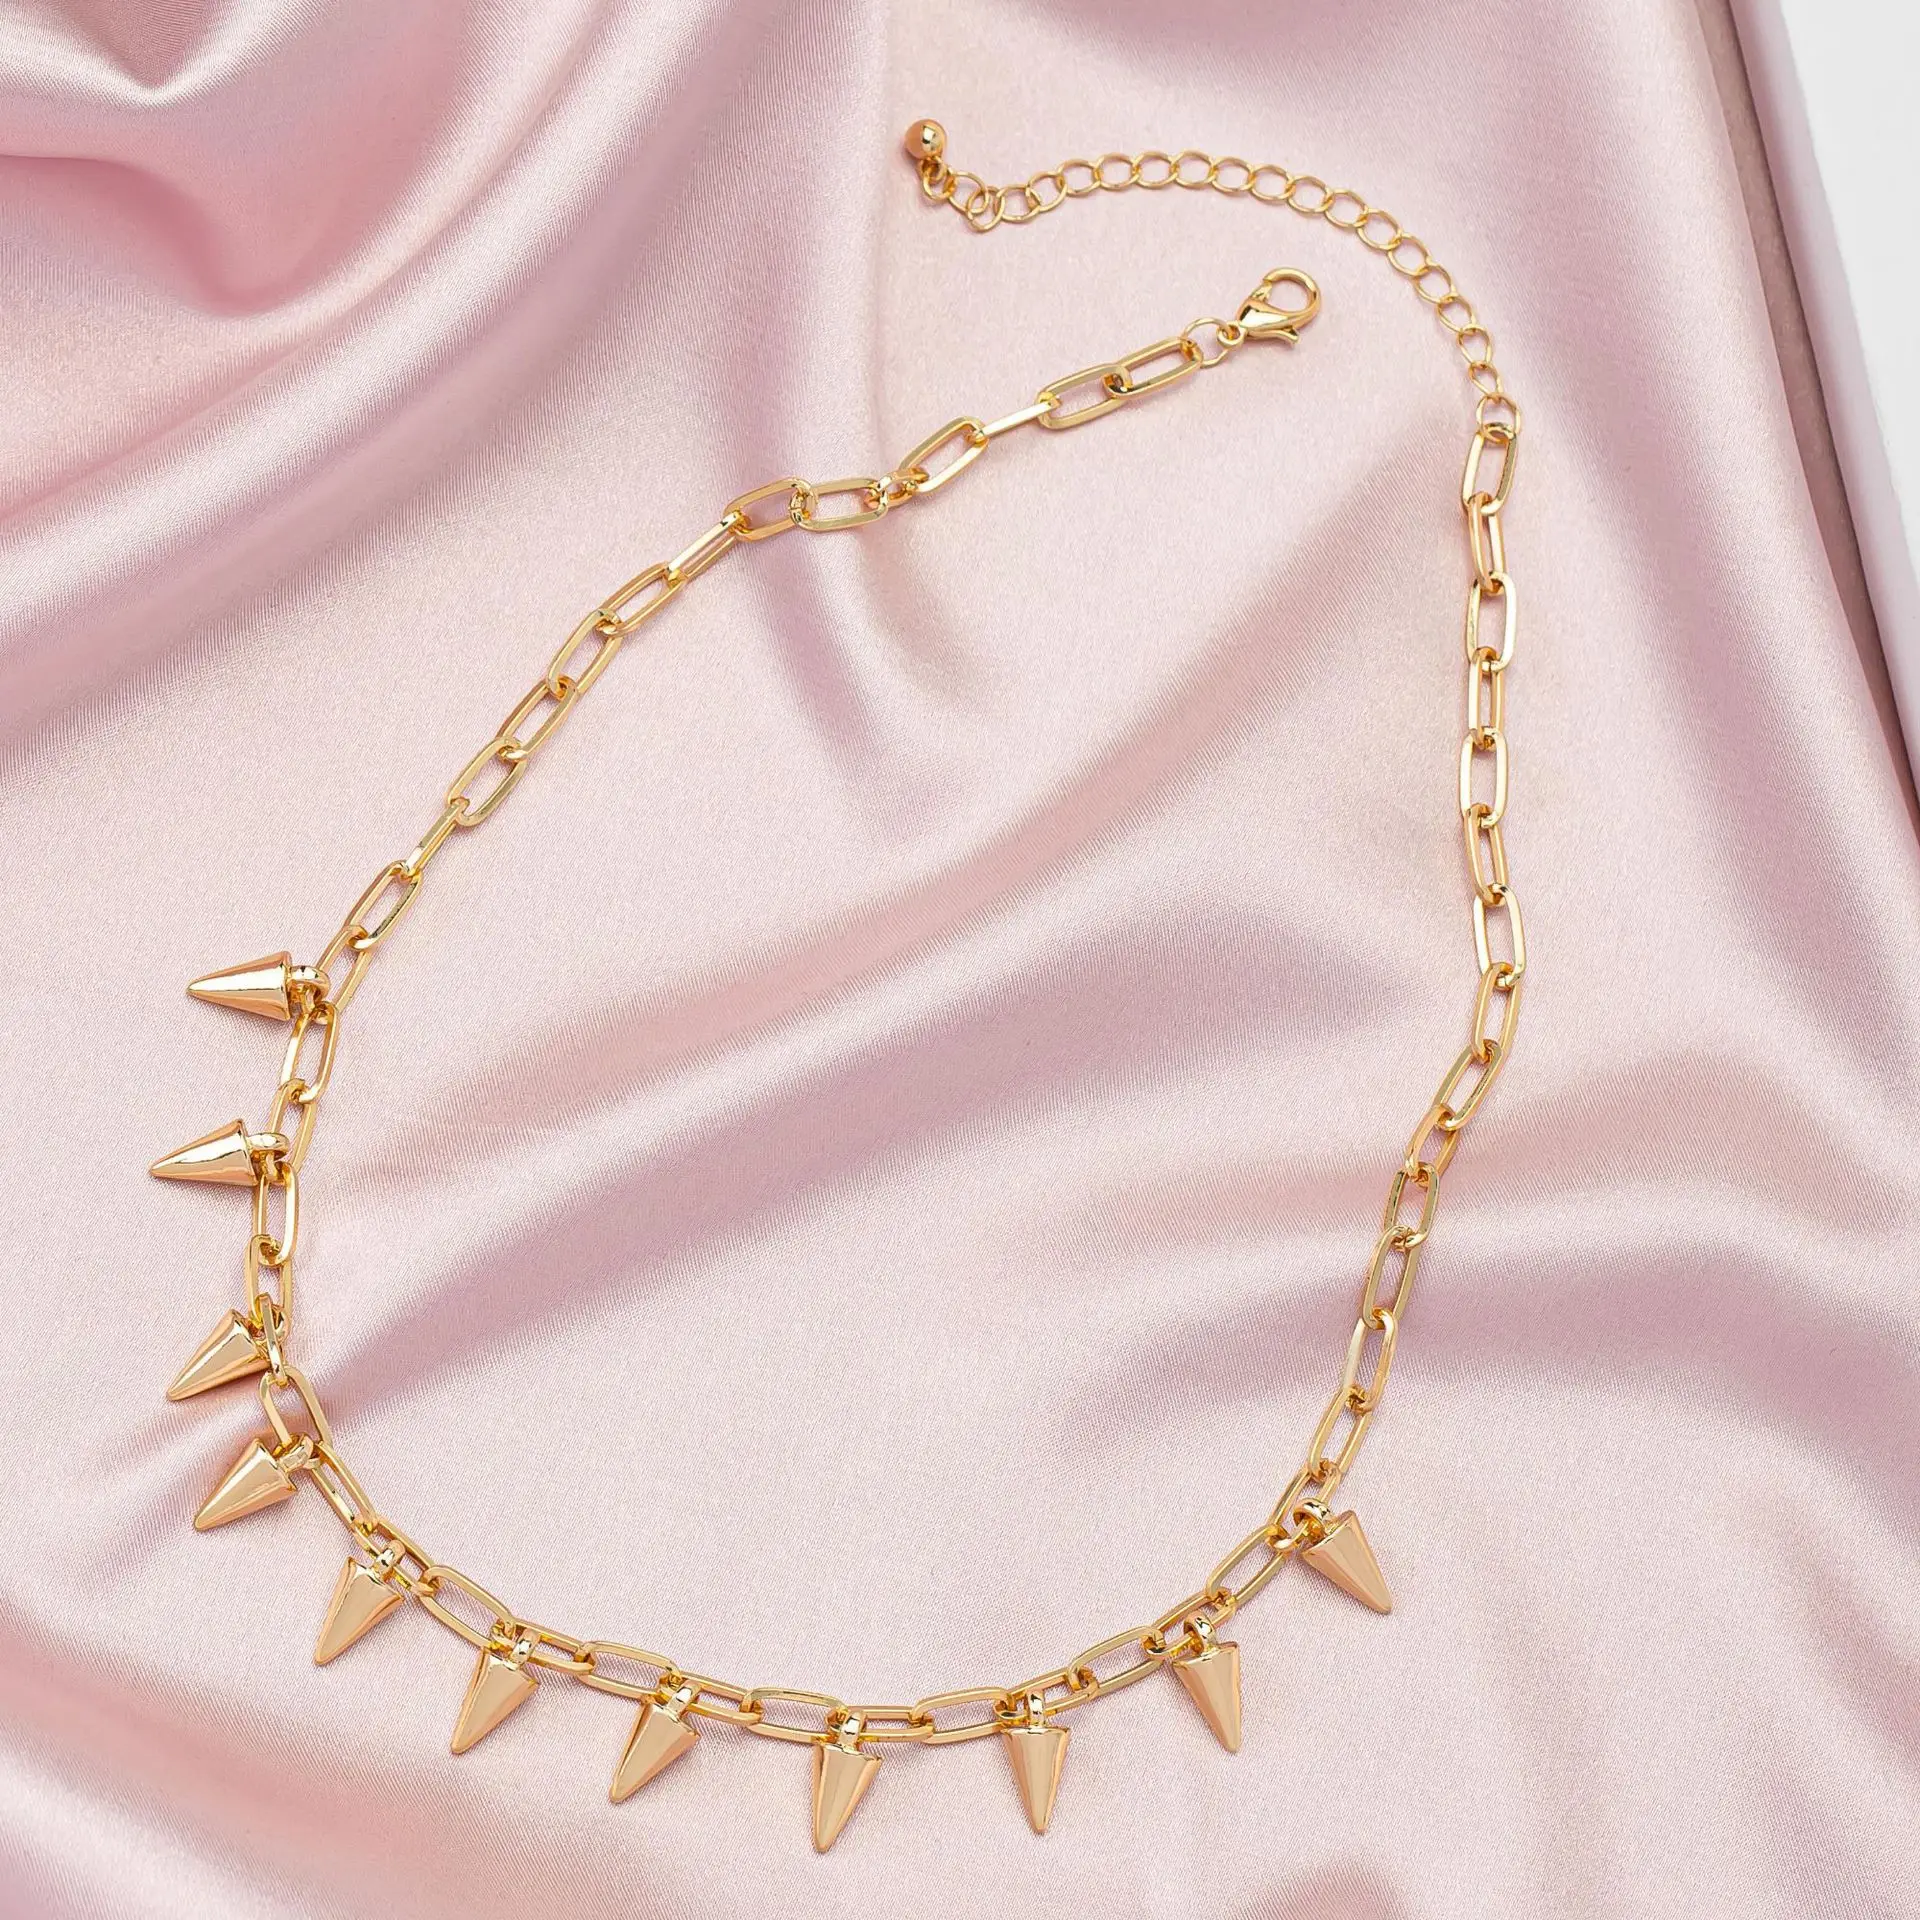 

New Exaggerated Personality Punk Studded Necklace Vintage Alloy Cone Pendant Collarbone Chain